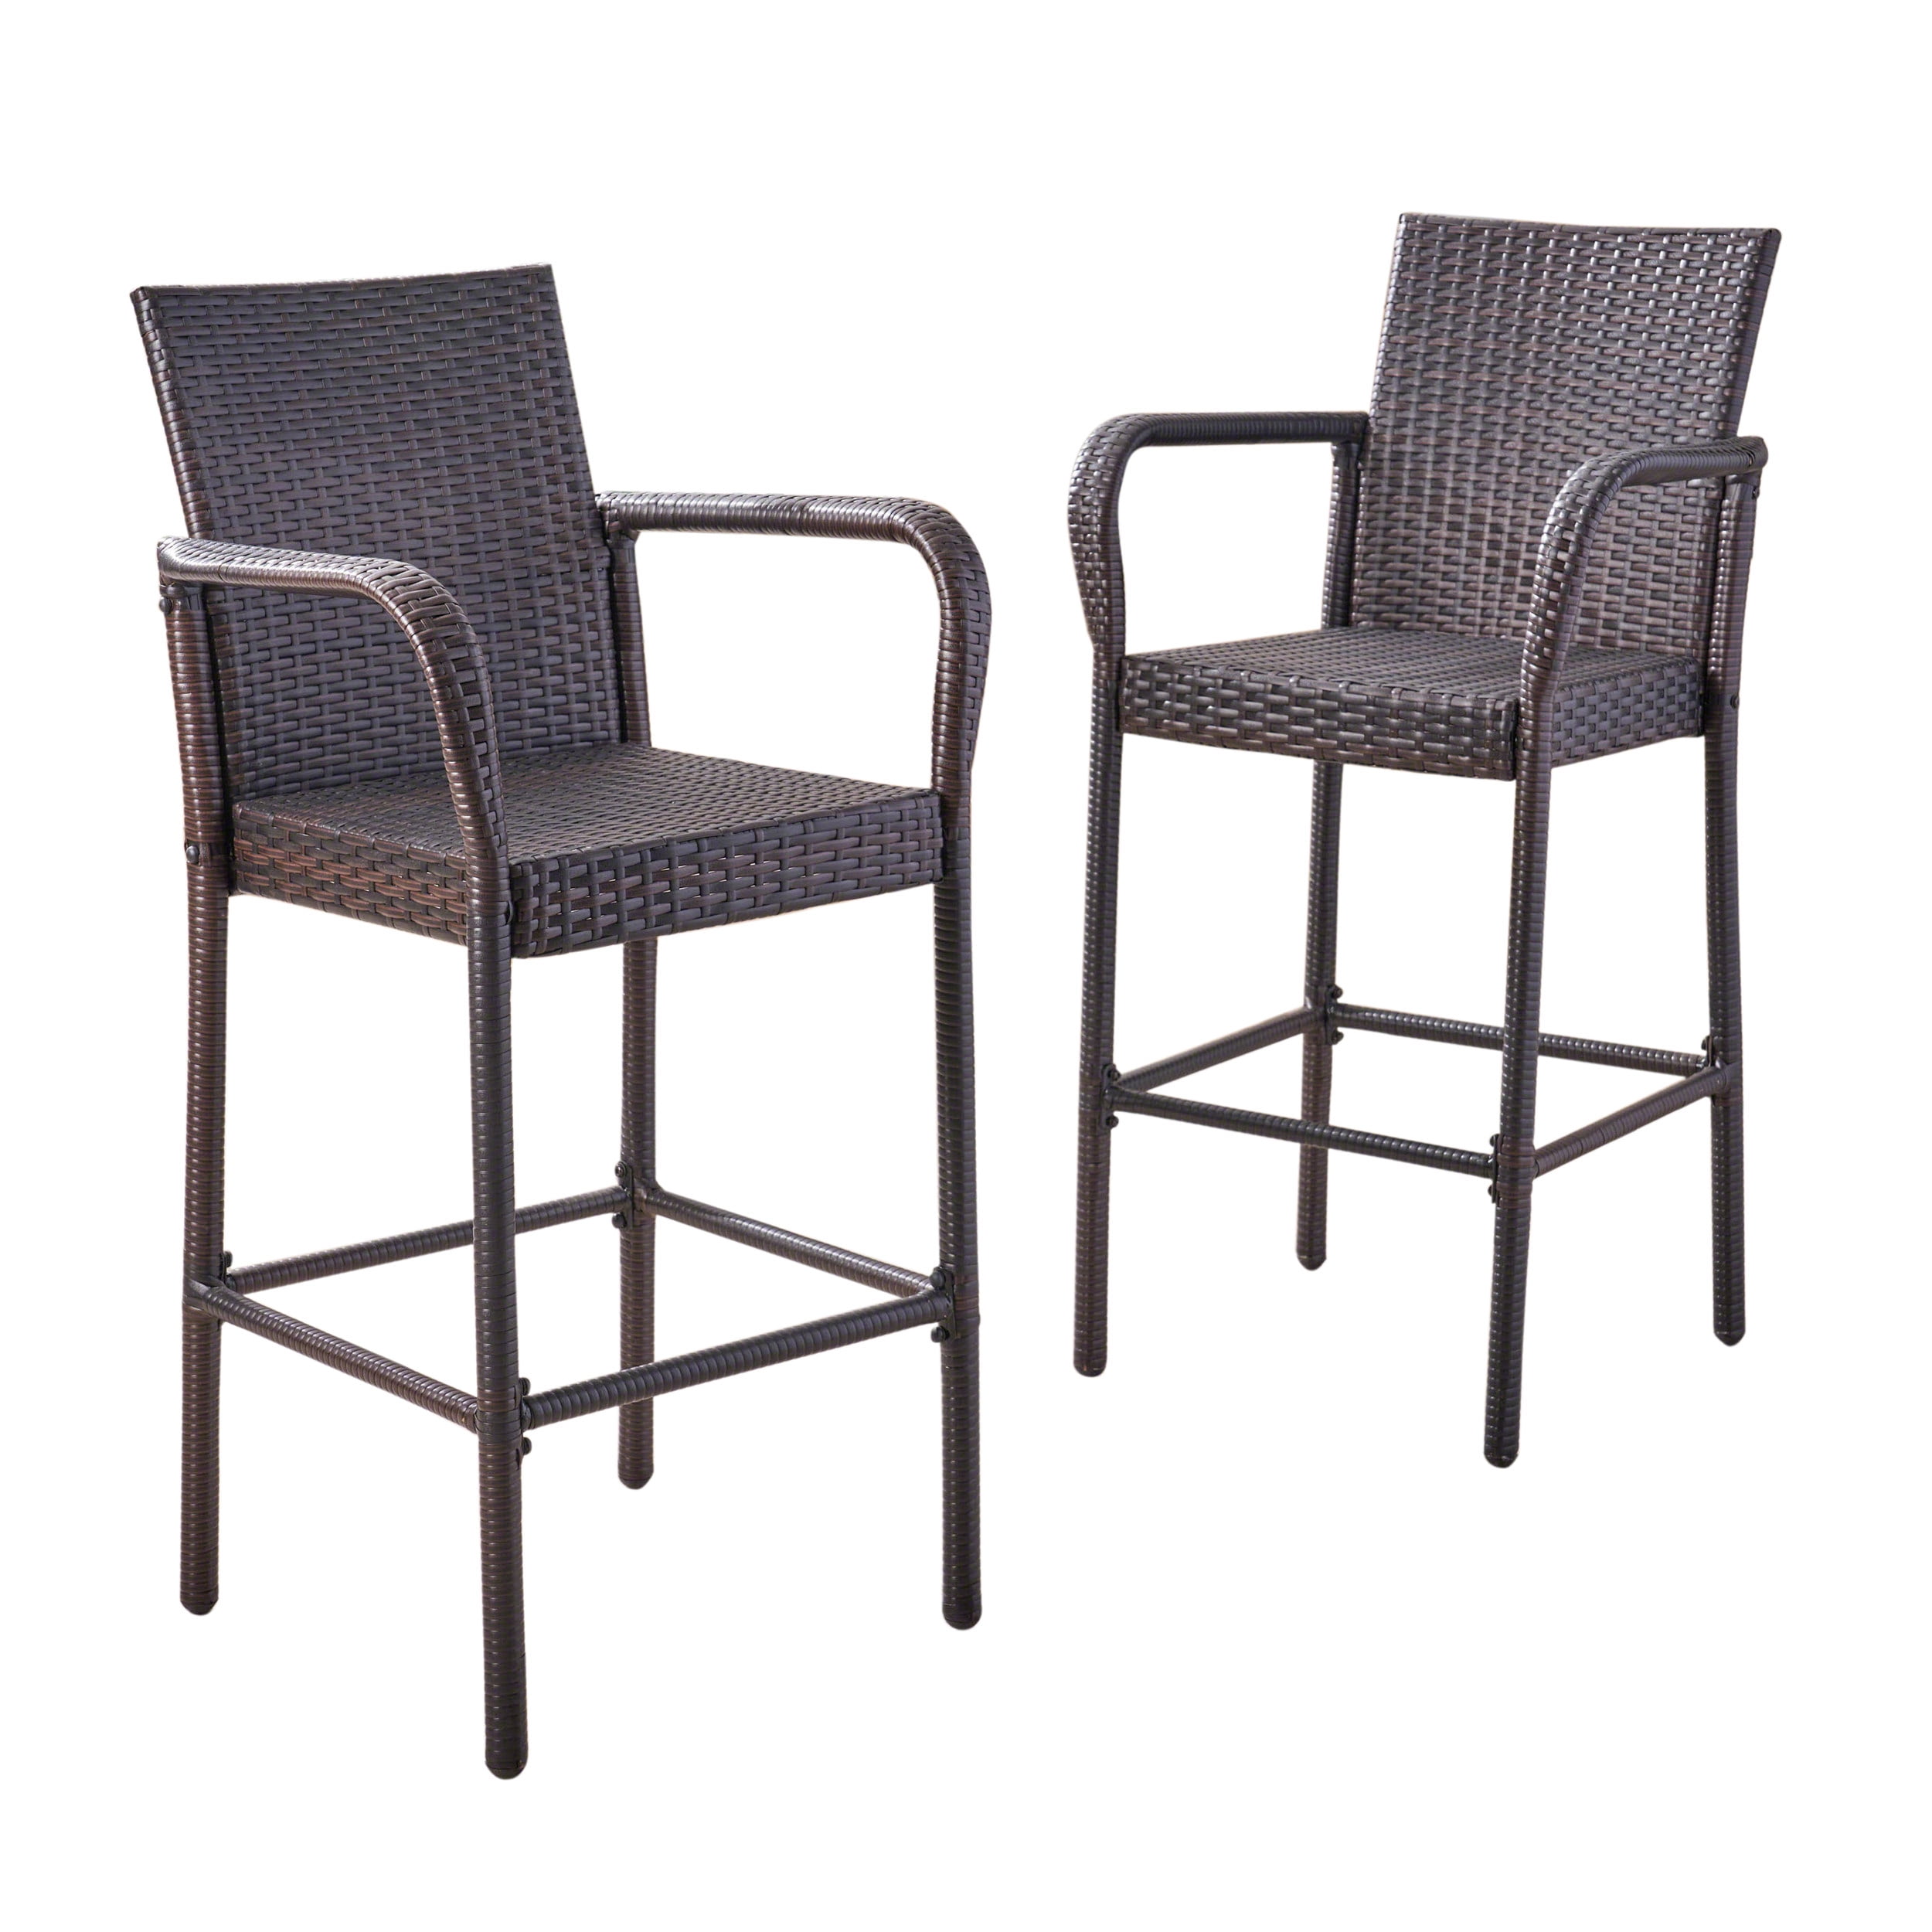 Daphne Outdoor Pe Wicker Barstool Set, White Wicker Outdoor Bar Stools With Backs